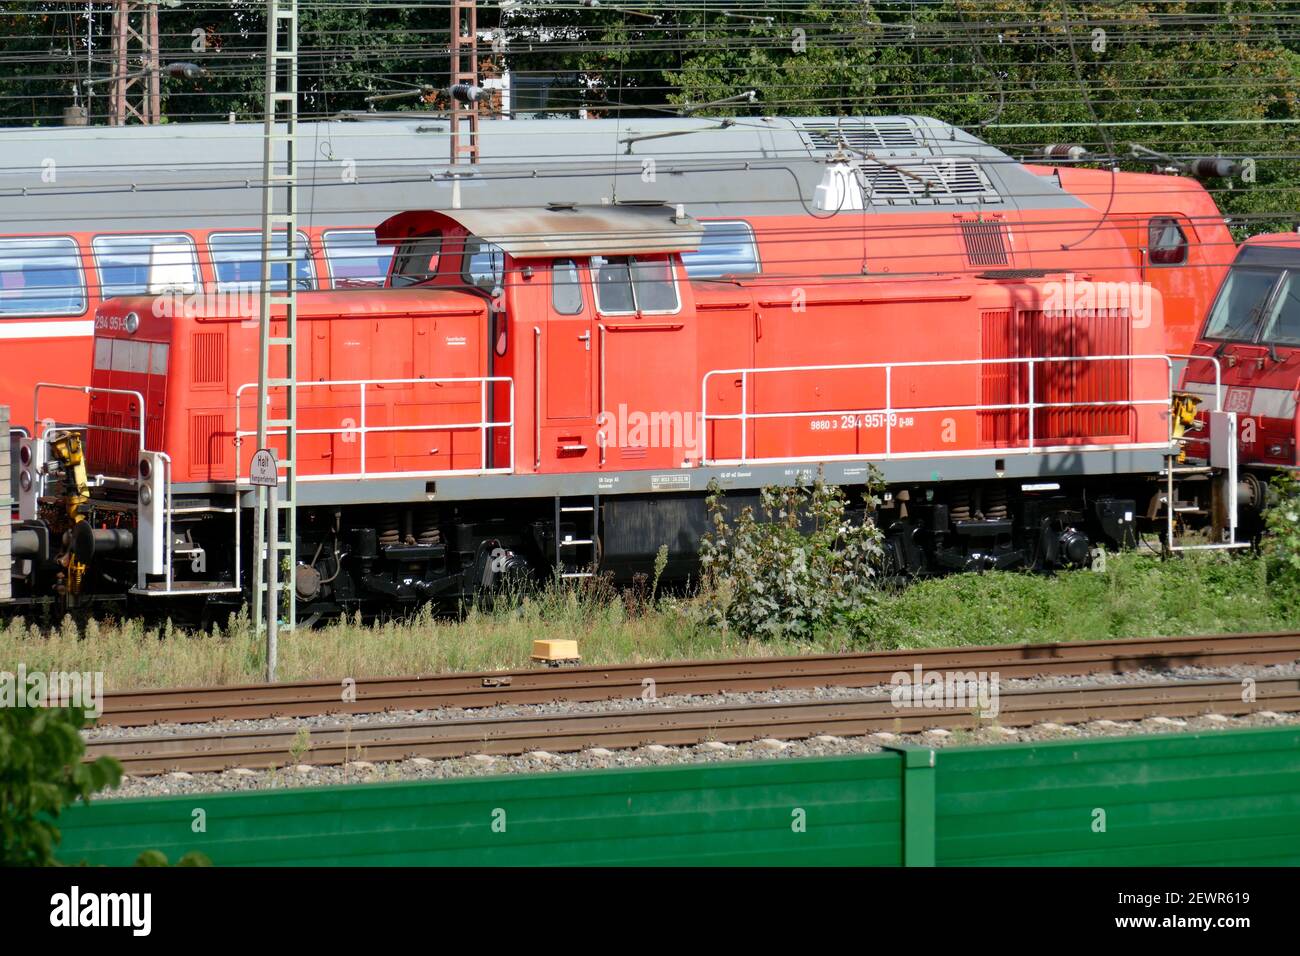 Red Diesel Locomotive, Local Trains, Railroad Facilities, Green Noise Barrier , Bremen, Germany Stock Photo